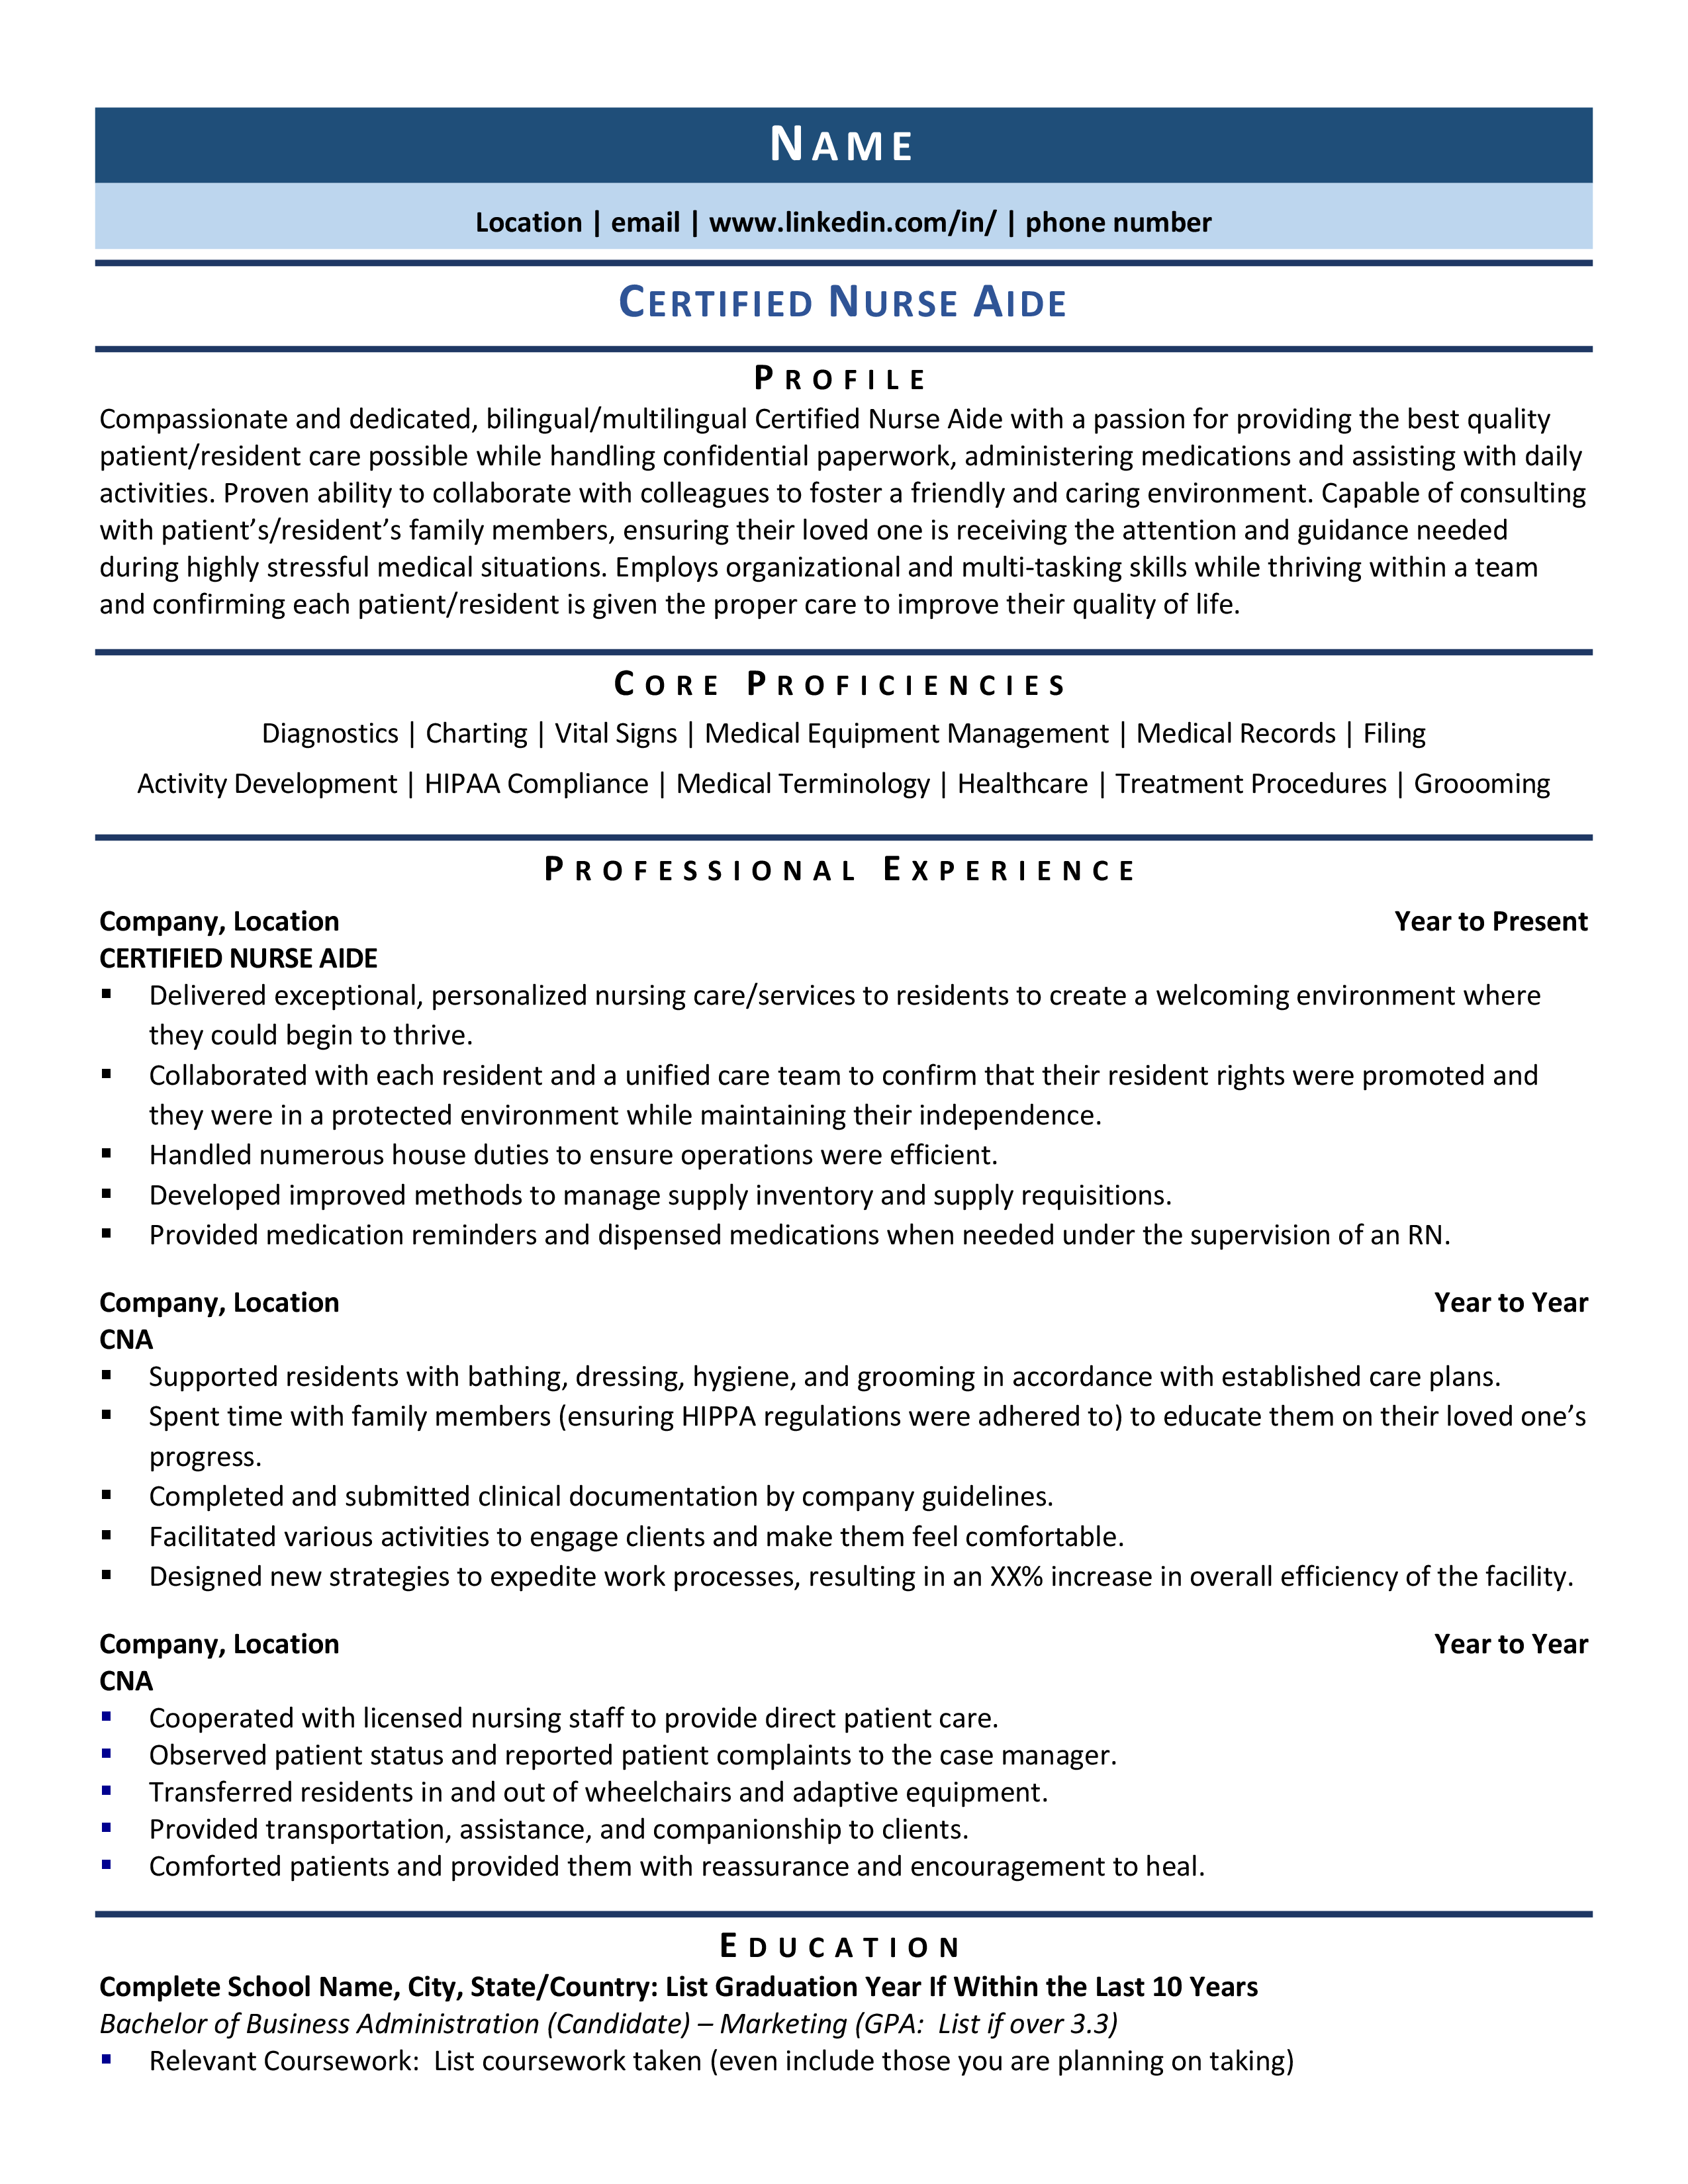 sample resume for nursing aide with experience